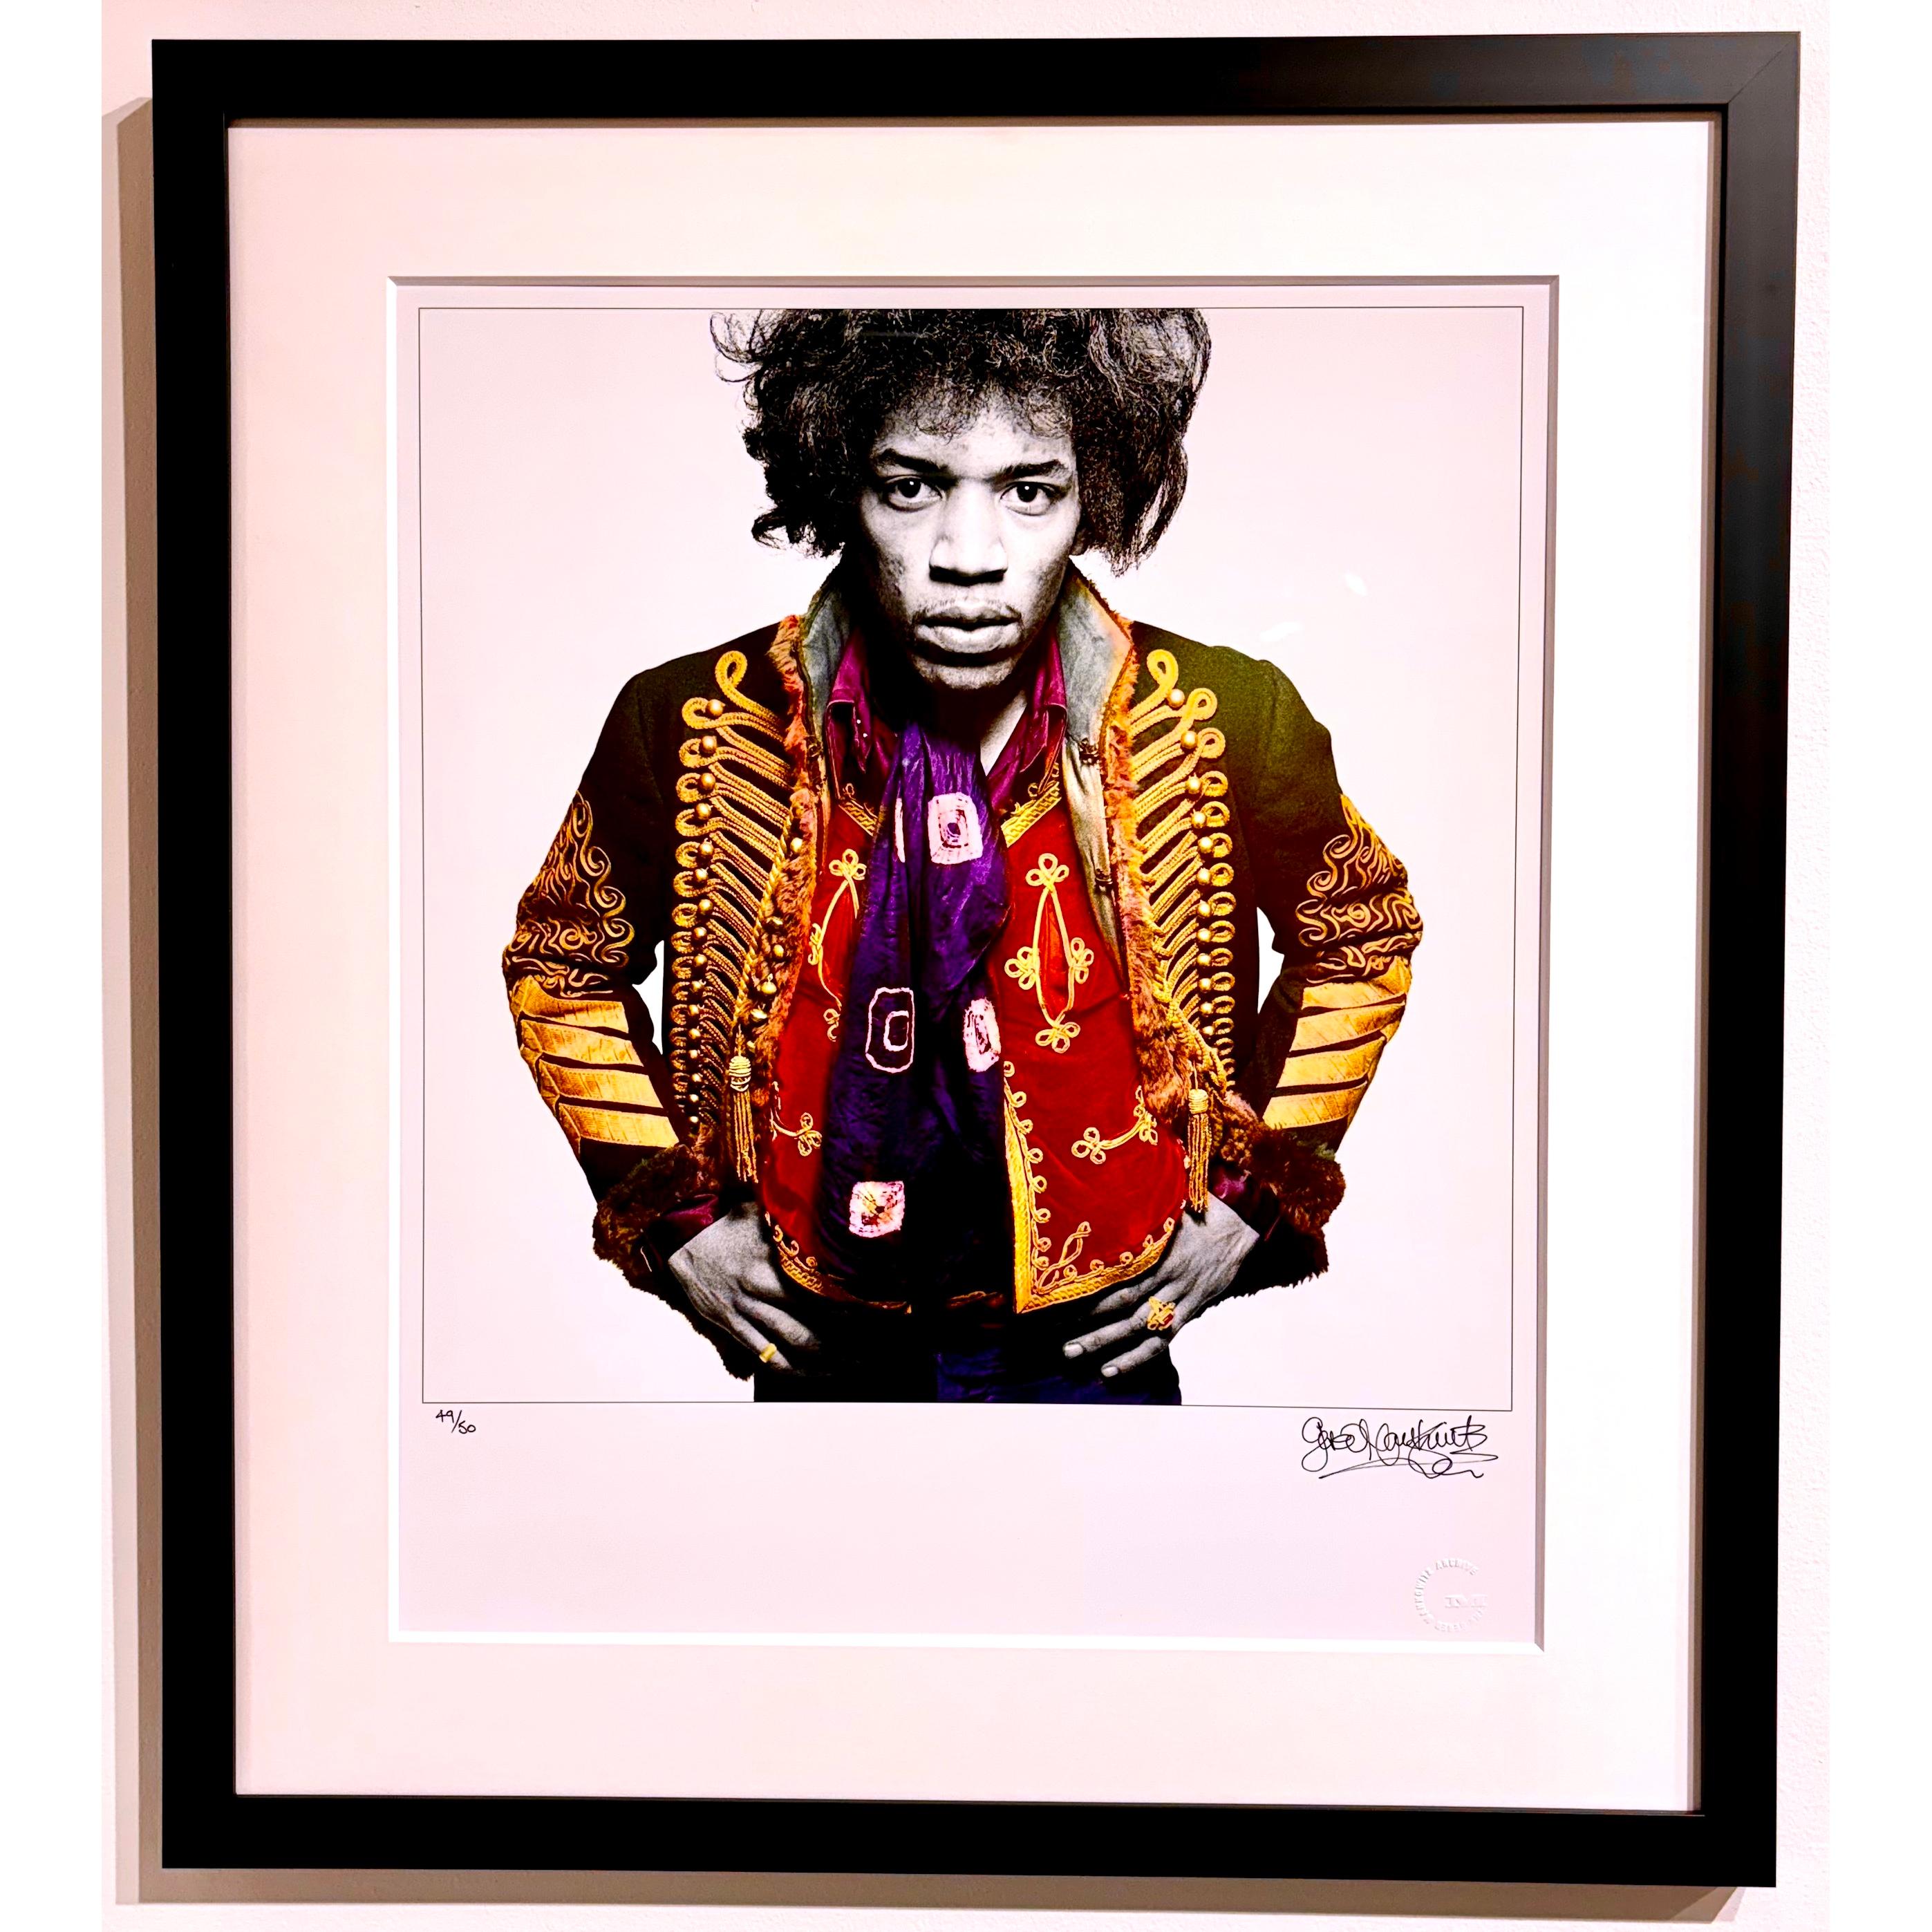 ONE OF THE LAST REMAINING PRINTS IN THIS SIZE

Jimi Hendrix “Classic Color” 1967 by Gered Mankovitz

Signed and numbered by Gered Mankowitz.

One of the last prints available, signed limited edition 20x24" print, edition number 49/50

Frame